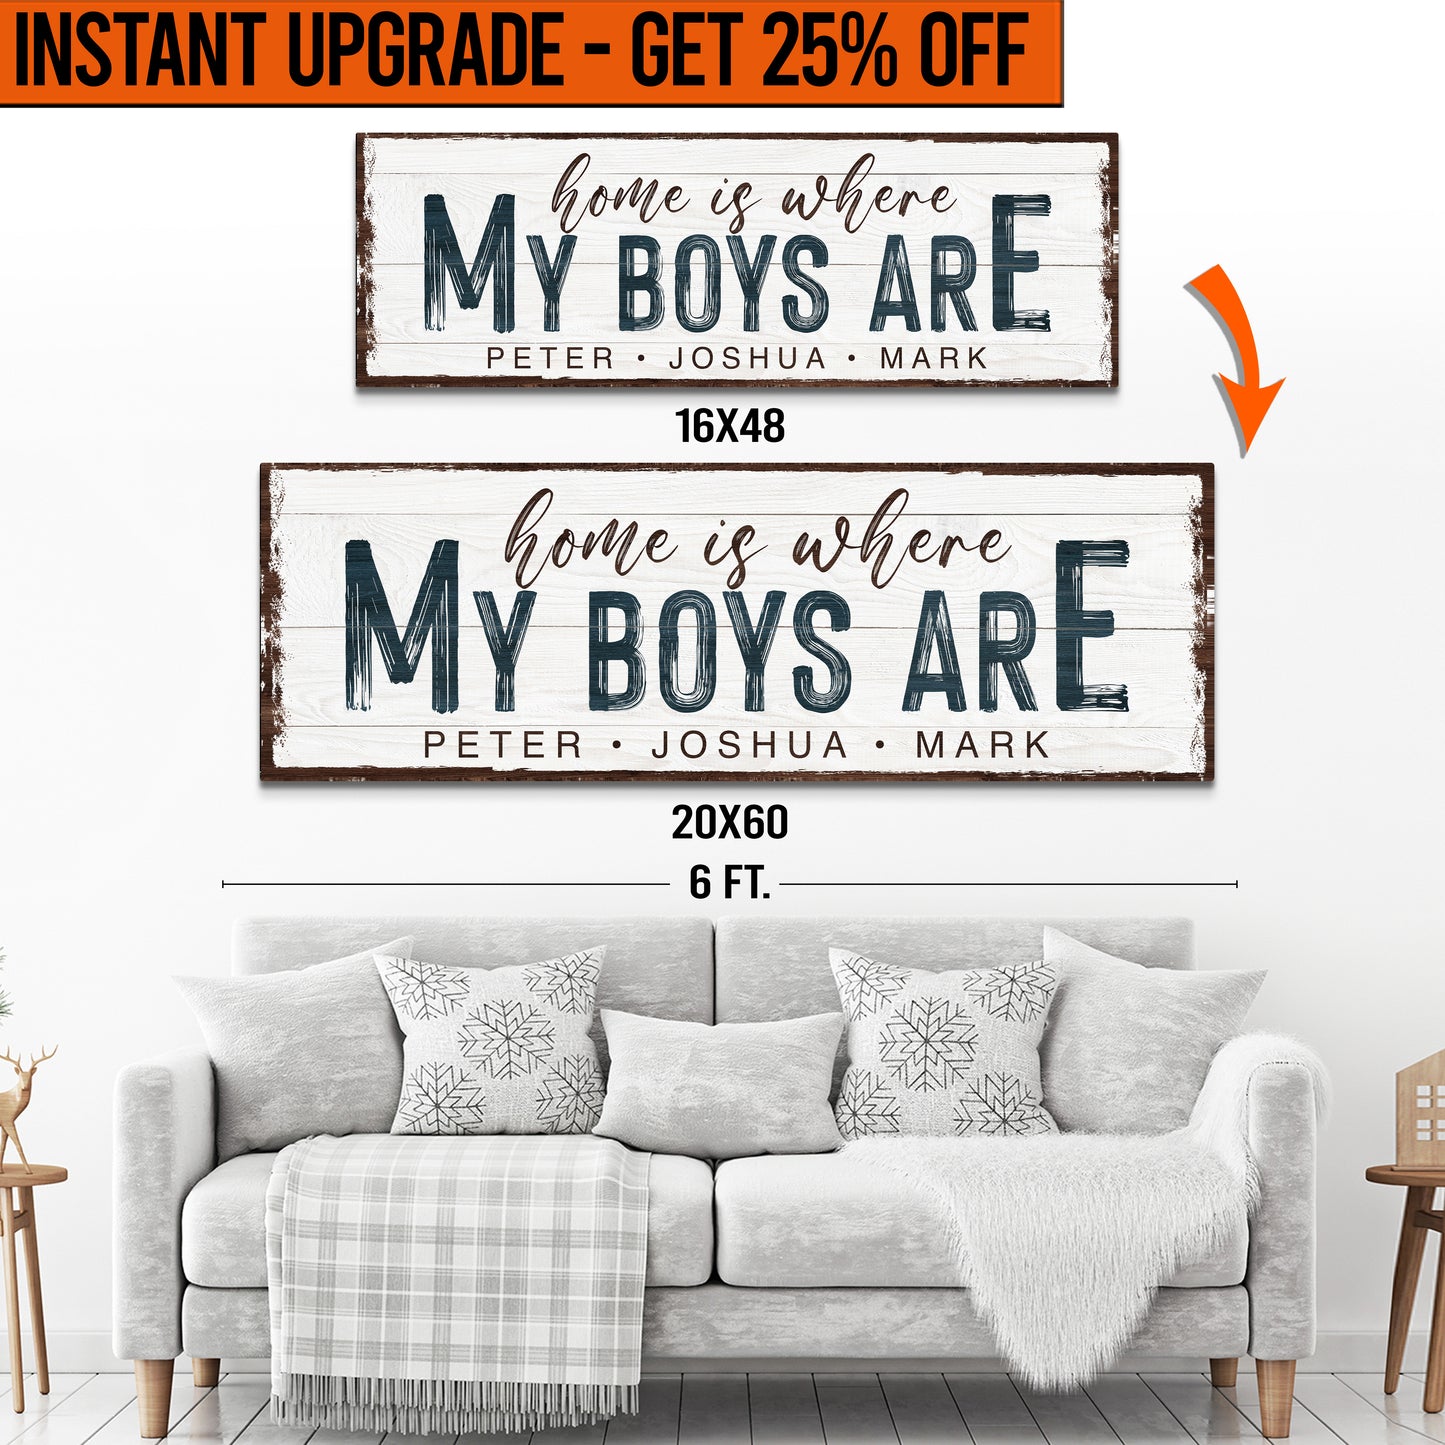 Upgrade Your 16x48 Inches 'HOME IS WHERE MY BOYS ARE' (Style 1) Canvas To 20x60 Inches